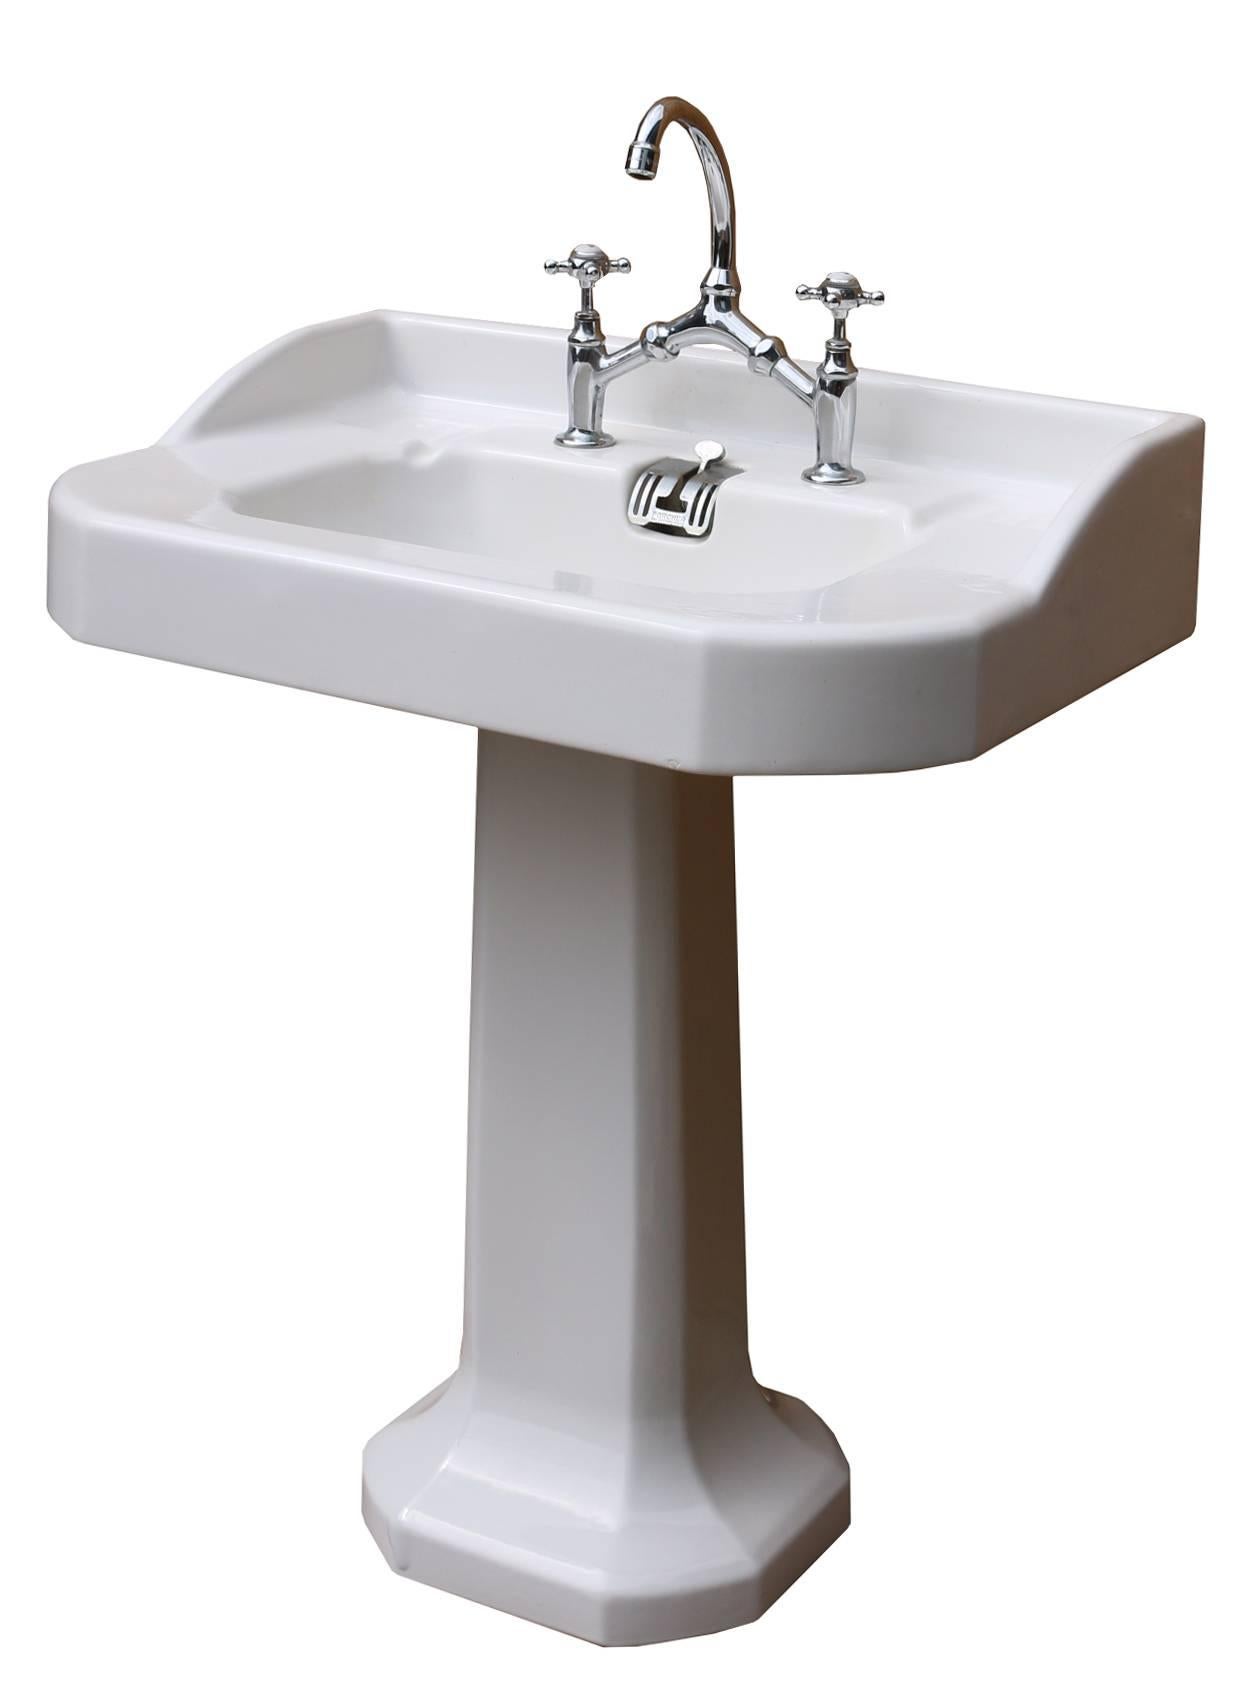 This basin is in very good condition for its age. The taps are untested and will require attention. There is a run in the glaze at the base o the pedestal. 
Height 86.5 cm (excluding taps)
Weight 28 kg.